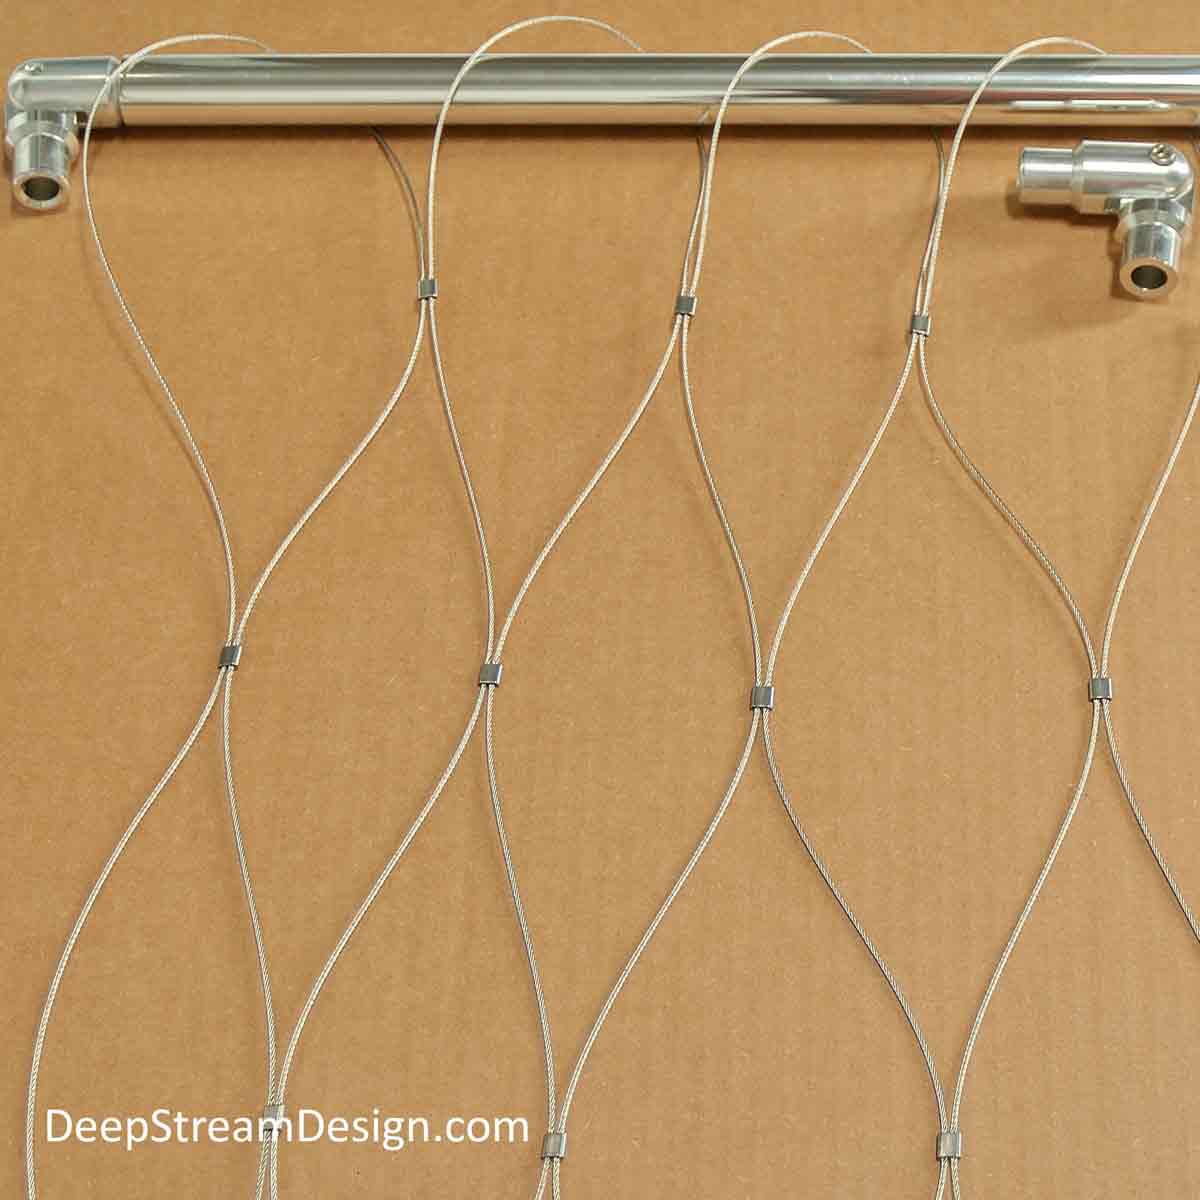 A studio photos of Jakob Swiss 316-stainless steel mesh showing construction and how to thread the supporting frame.